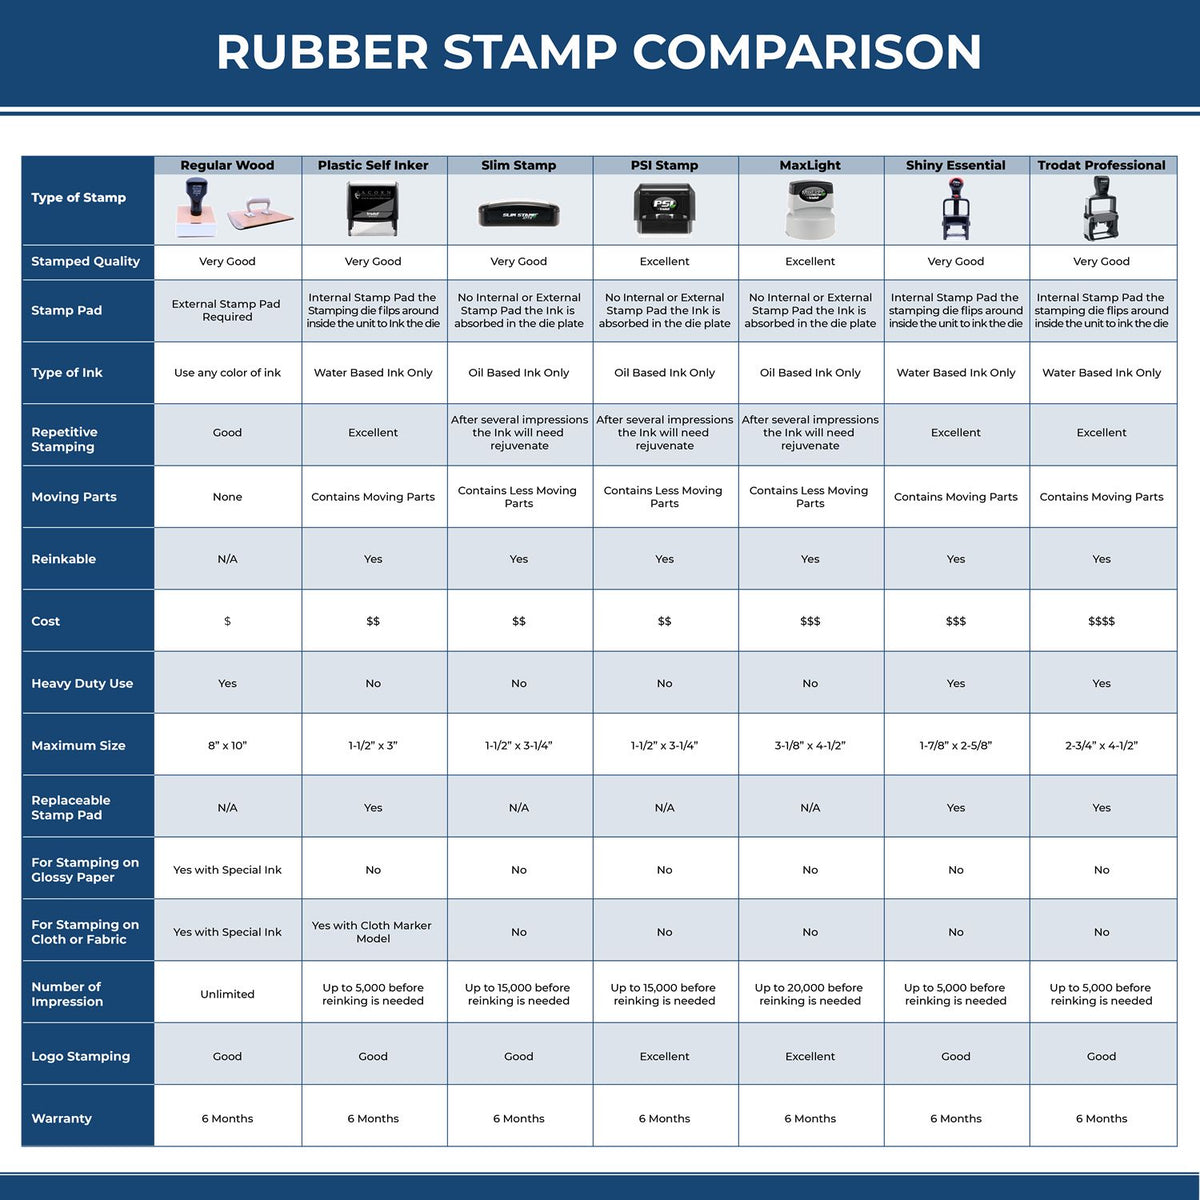 Large Living Will On File Rubber Stamp 4520R Rubber Stamp Comparison